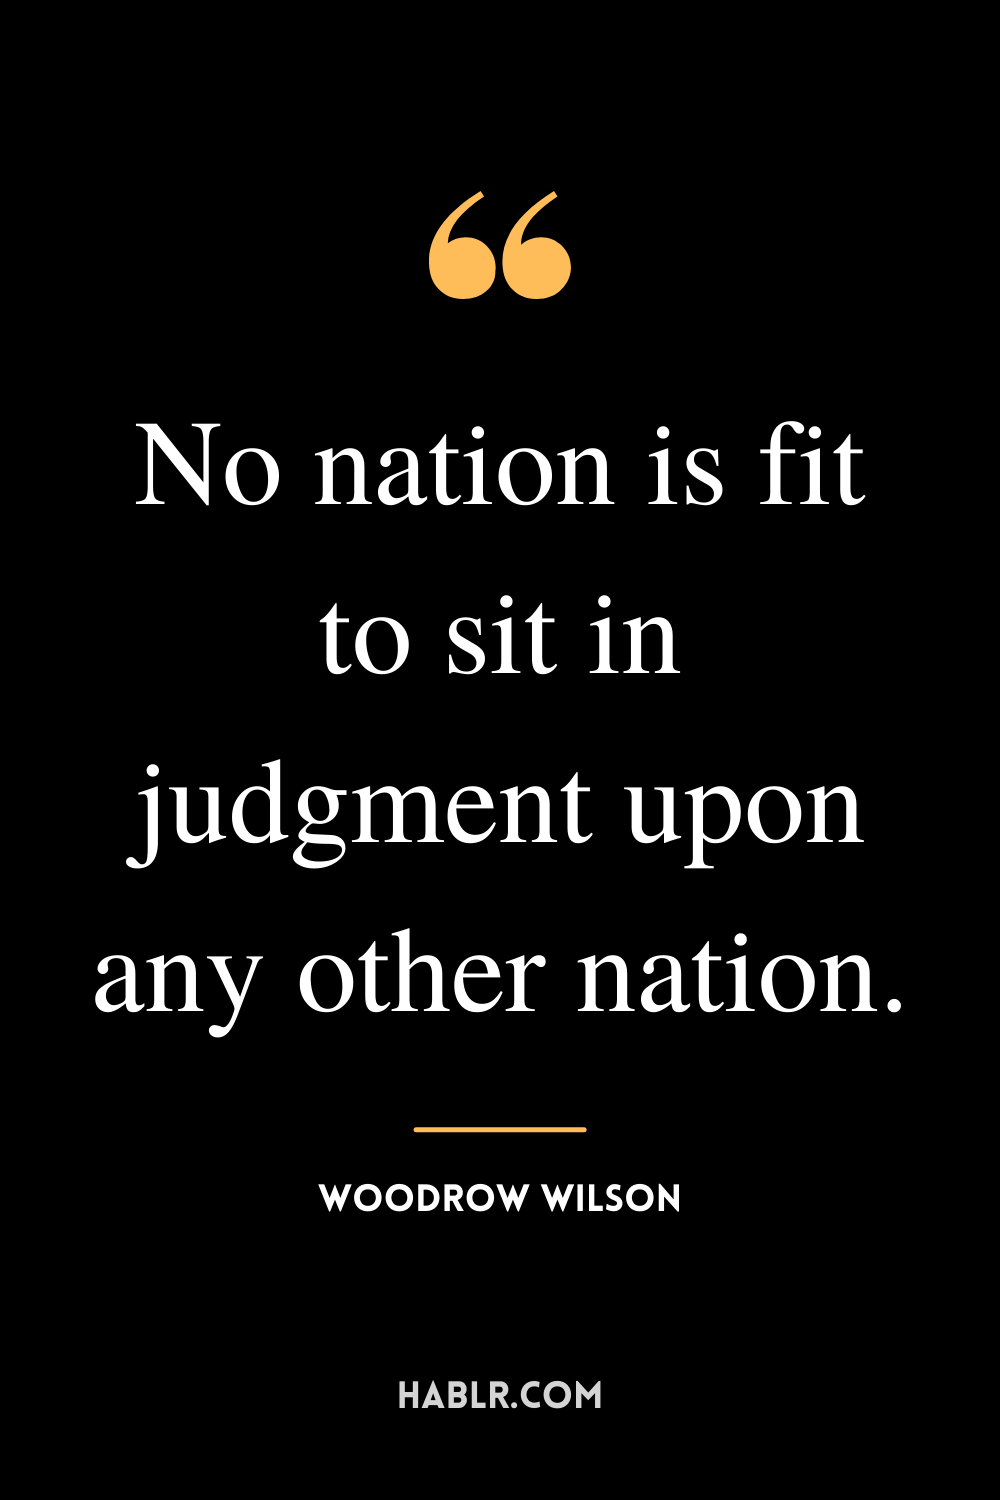 “No nation is fit to sit in judgment upon any other nation.” -Woodrow Wilson